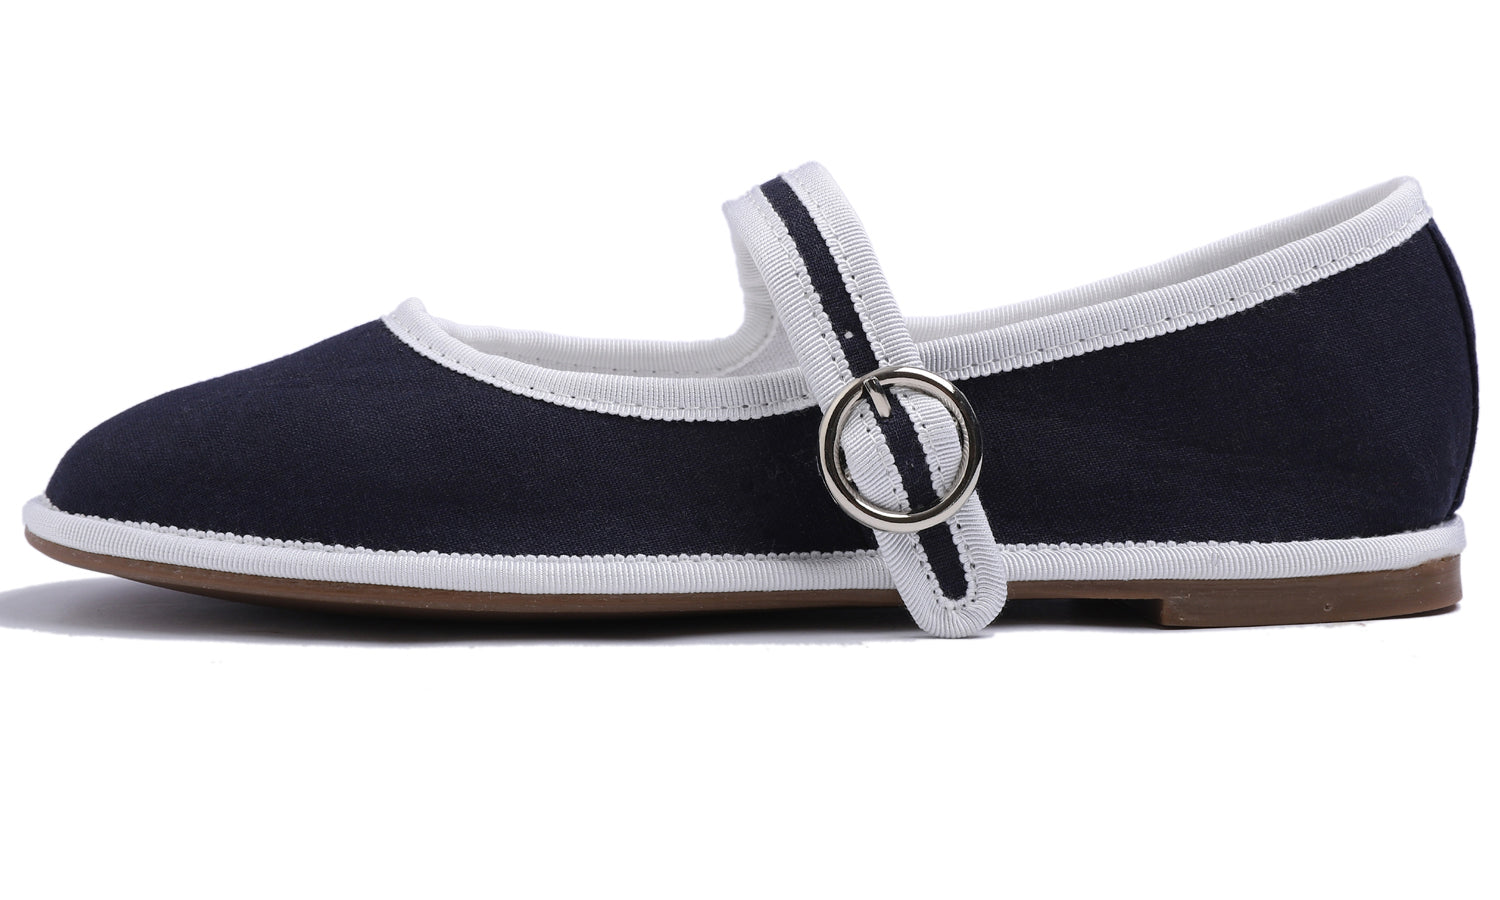 Feversole Women's Soft Breathable Mary Jane Memory Foam Cushioned Comfort Round Toe Metal Buckle Flats Walking Shoes Navy Blue Canvas